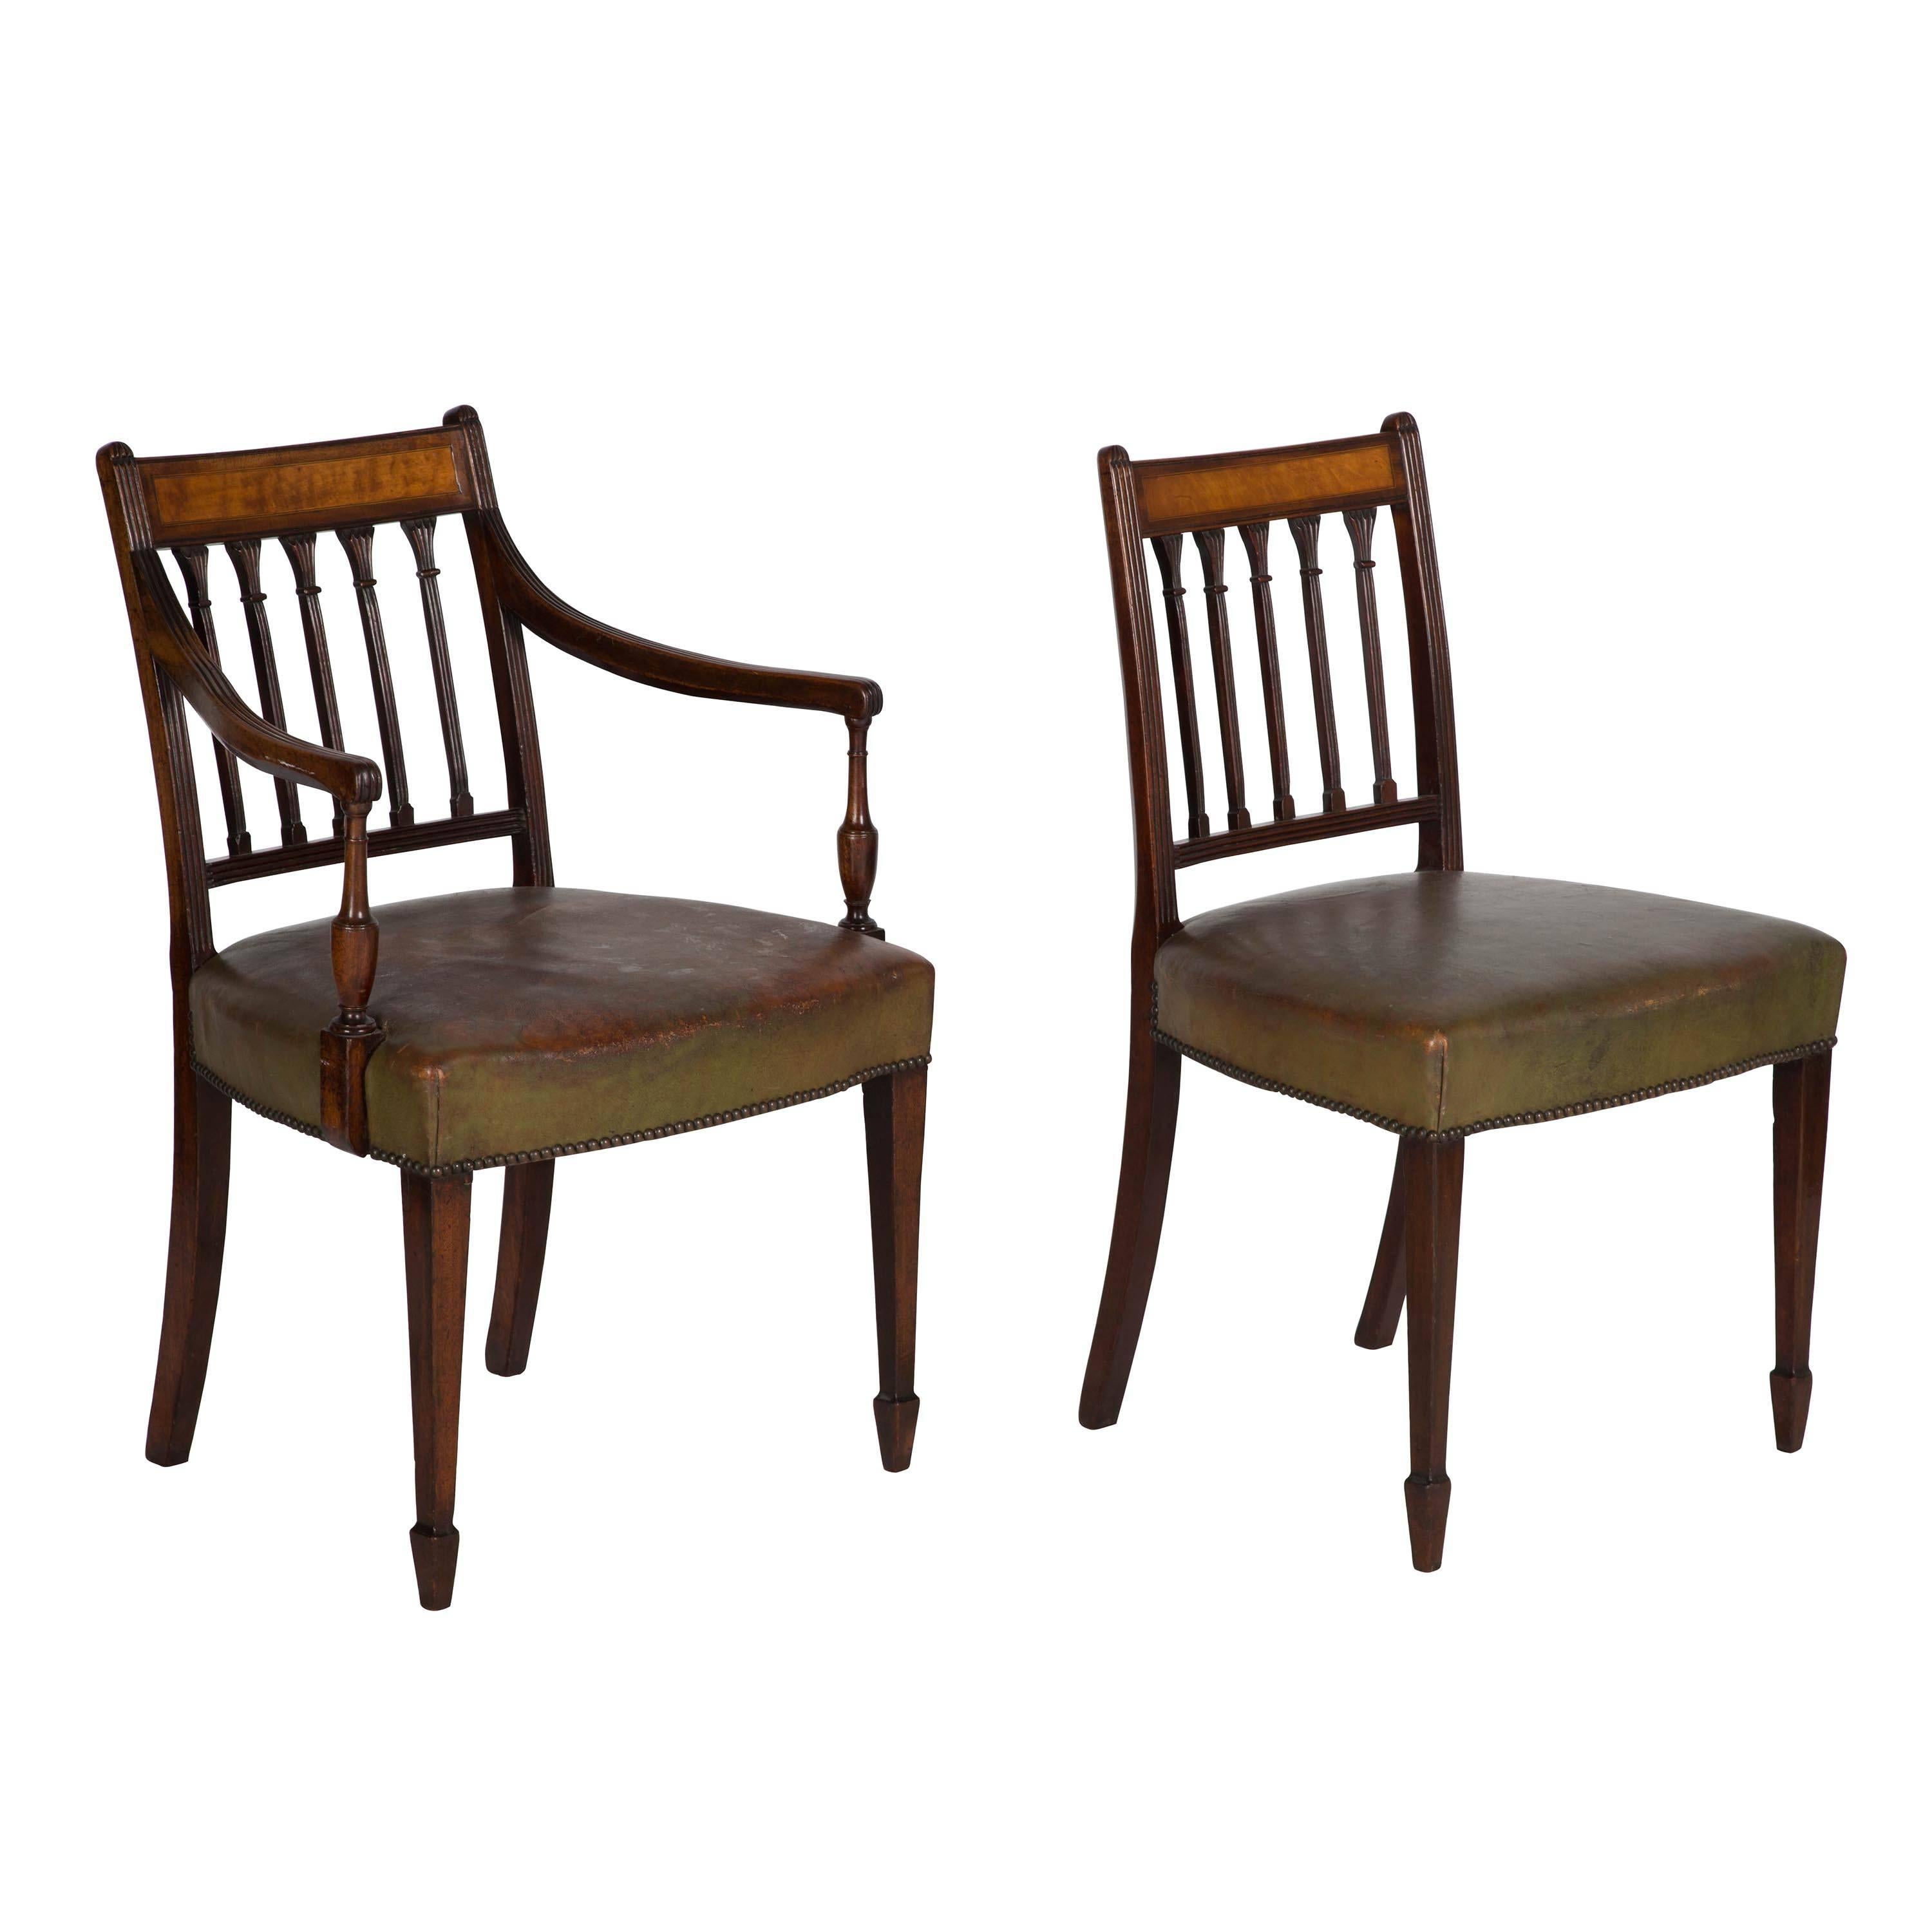 A superb set of eight George III dining chairs including two carvers with satinwood inlay to the curved bar backs.